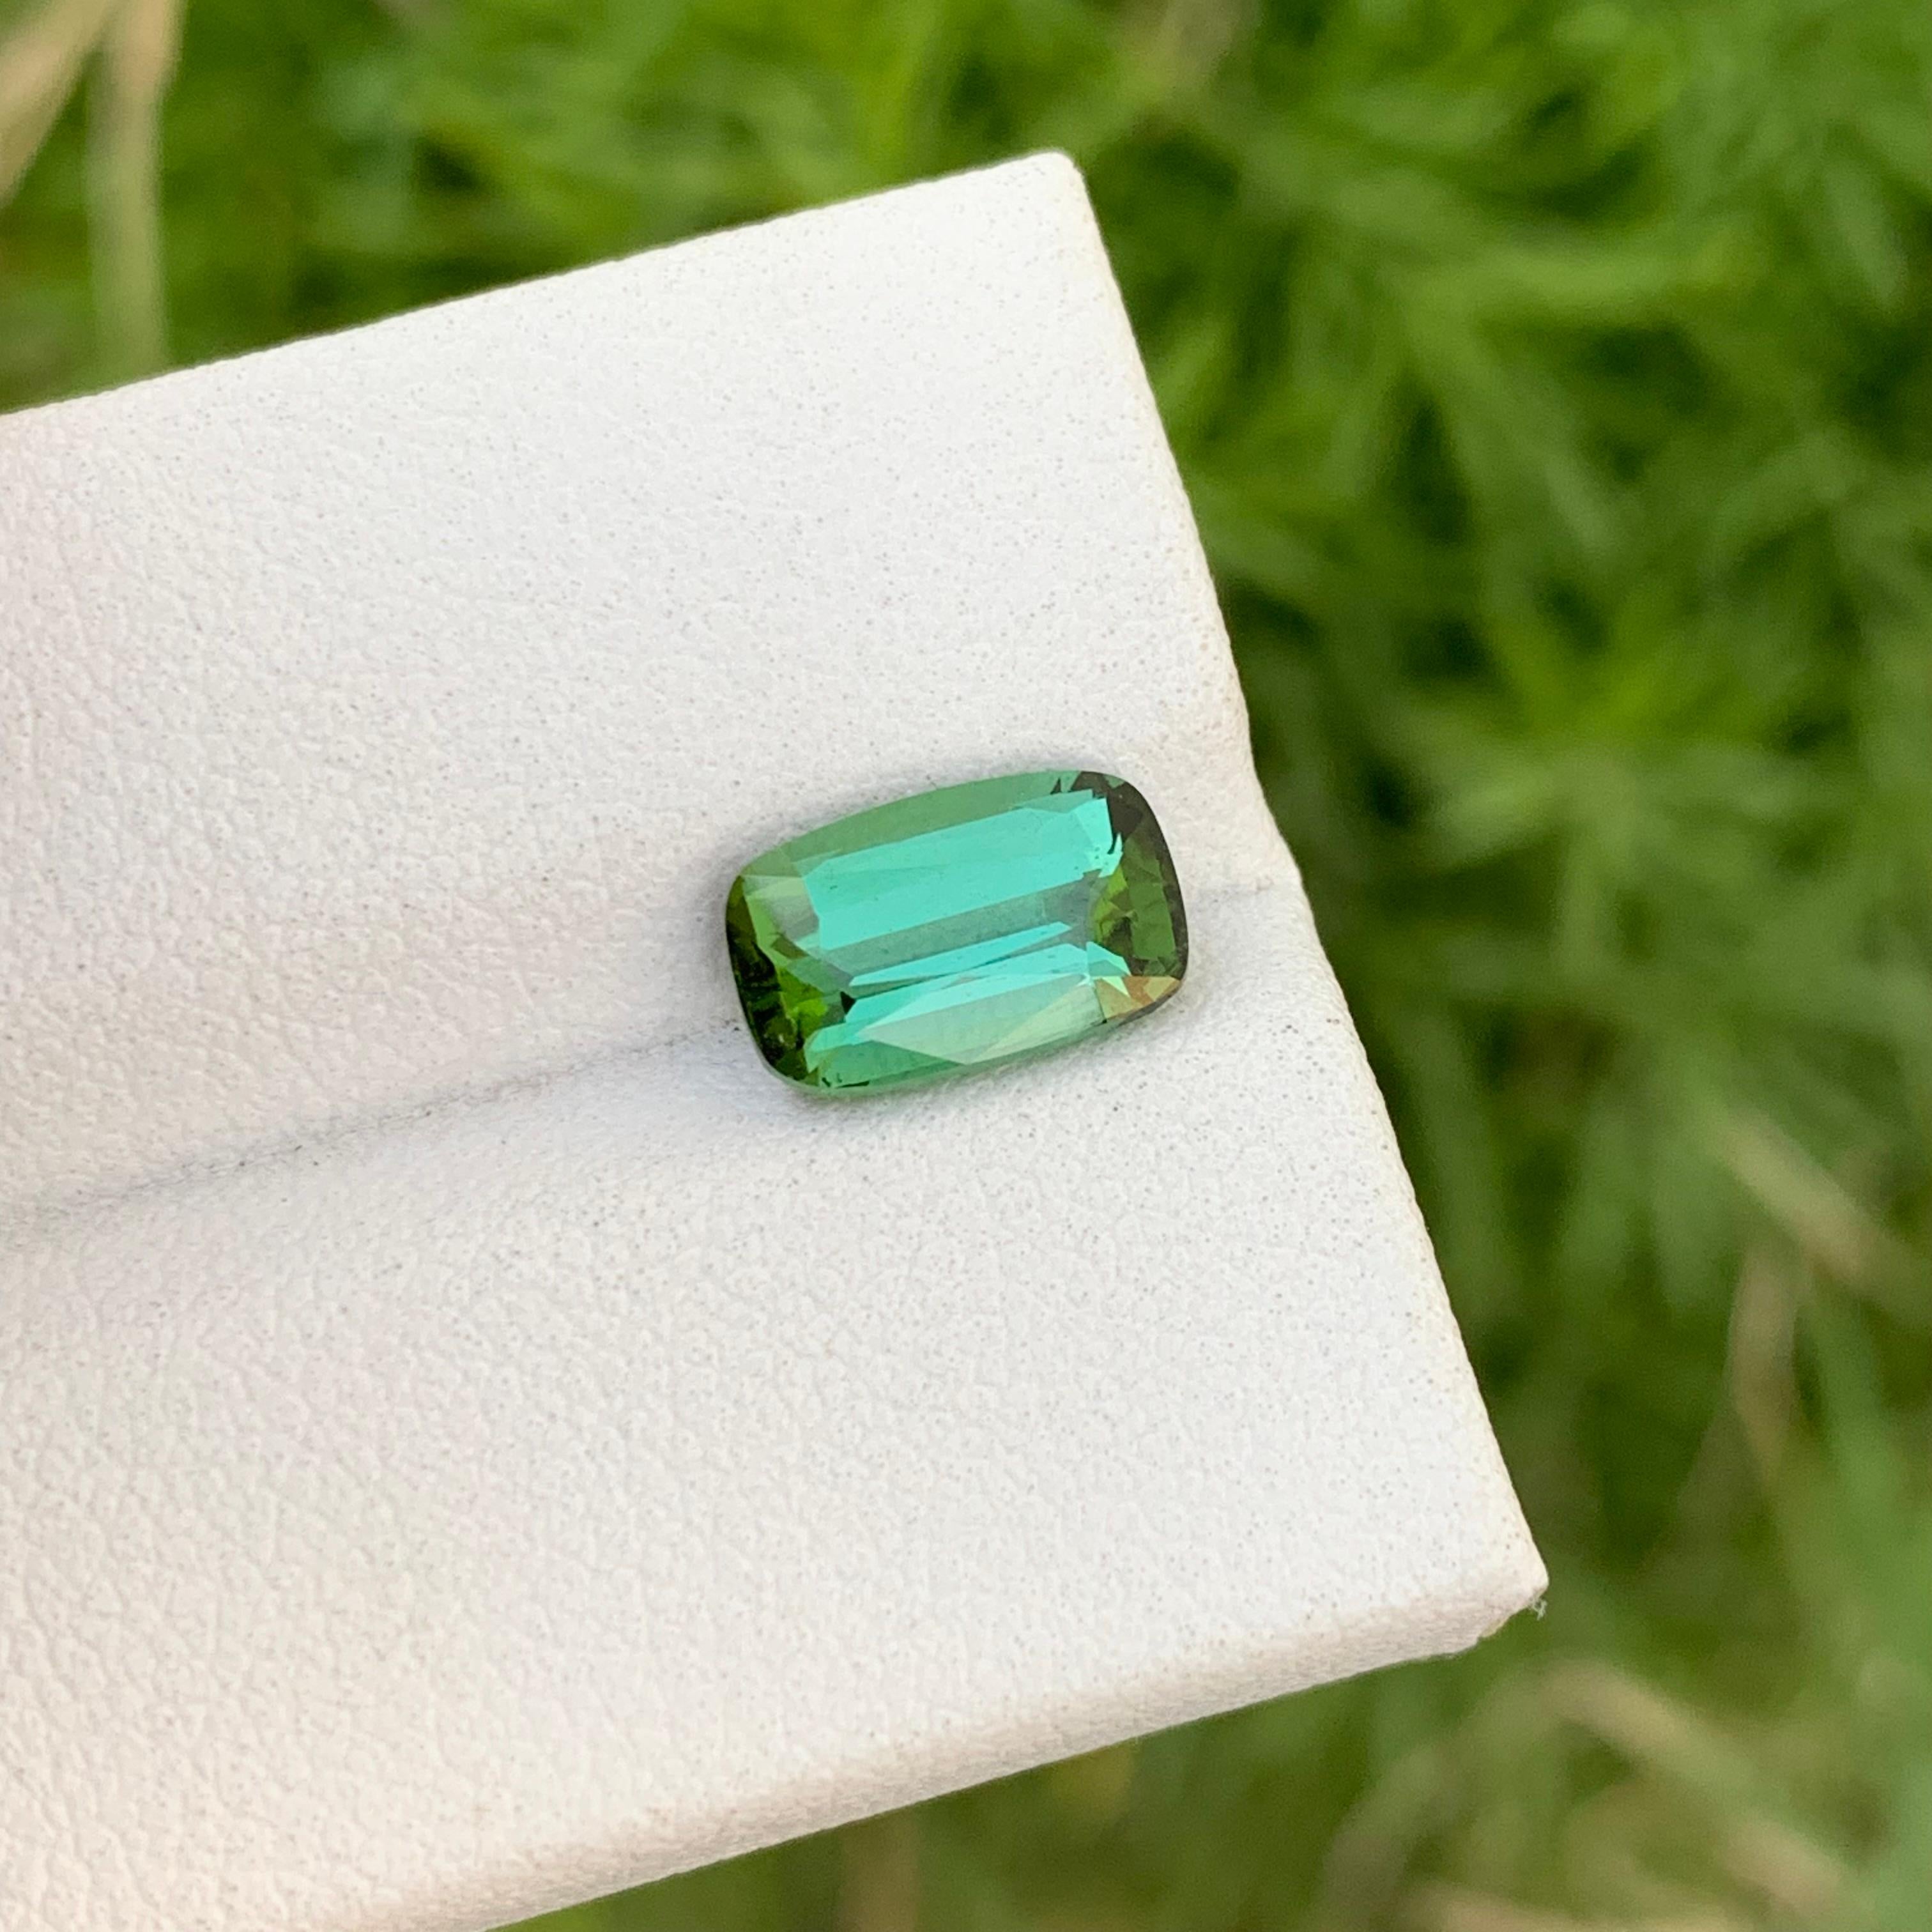 Loose Lagoon Shade Tourmaline
Weight: 1.90 Carats
Dimension: 9.4 x 5.8 x 4.5 Mm
Colour: Lagoon 
Origin: Afghanistan
Certificate: On Demand
Treatment: Non

Tourmaline is a captivating gemstone known for its remarkable variety of colors, making it a